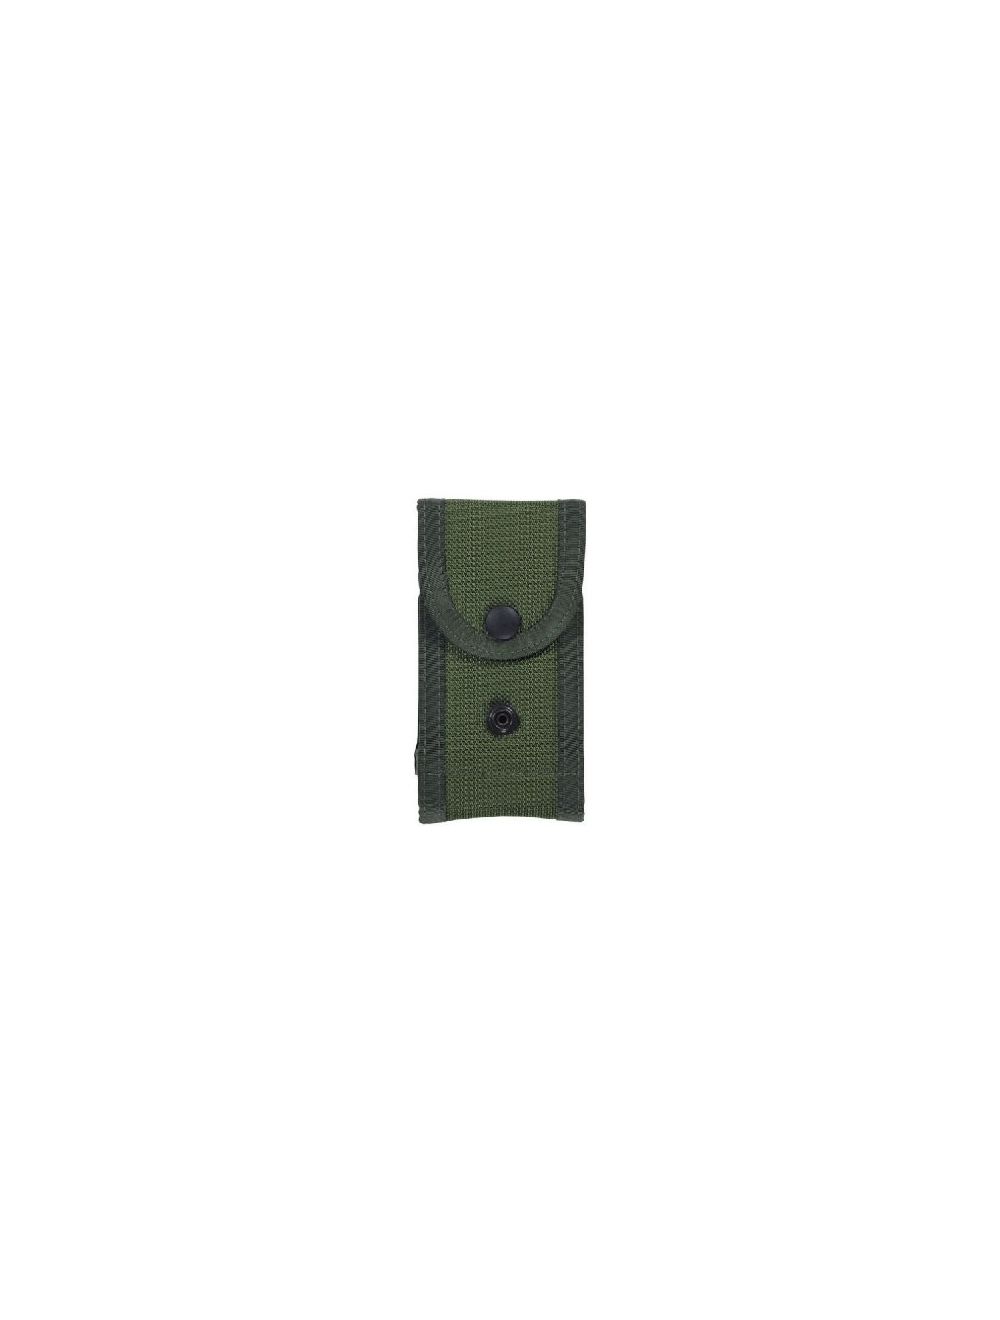 Model M1025 Military Double Magazine Pouch